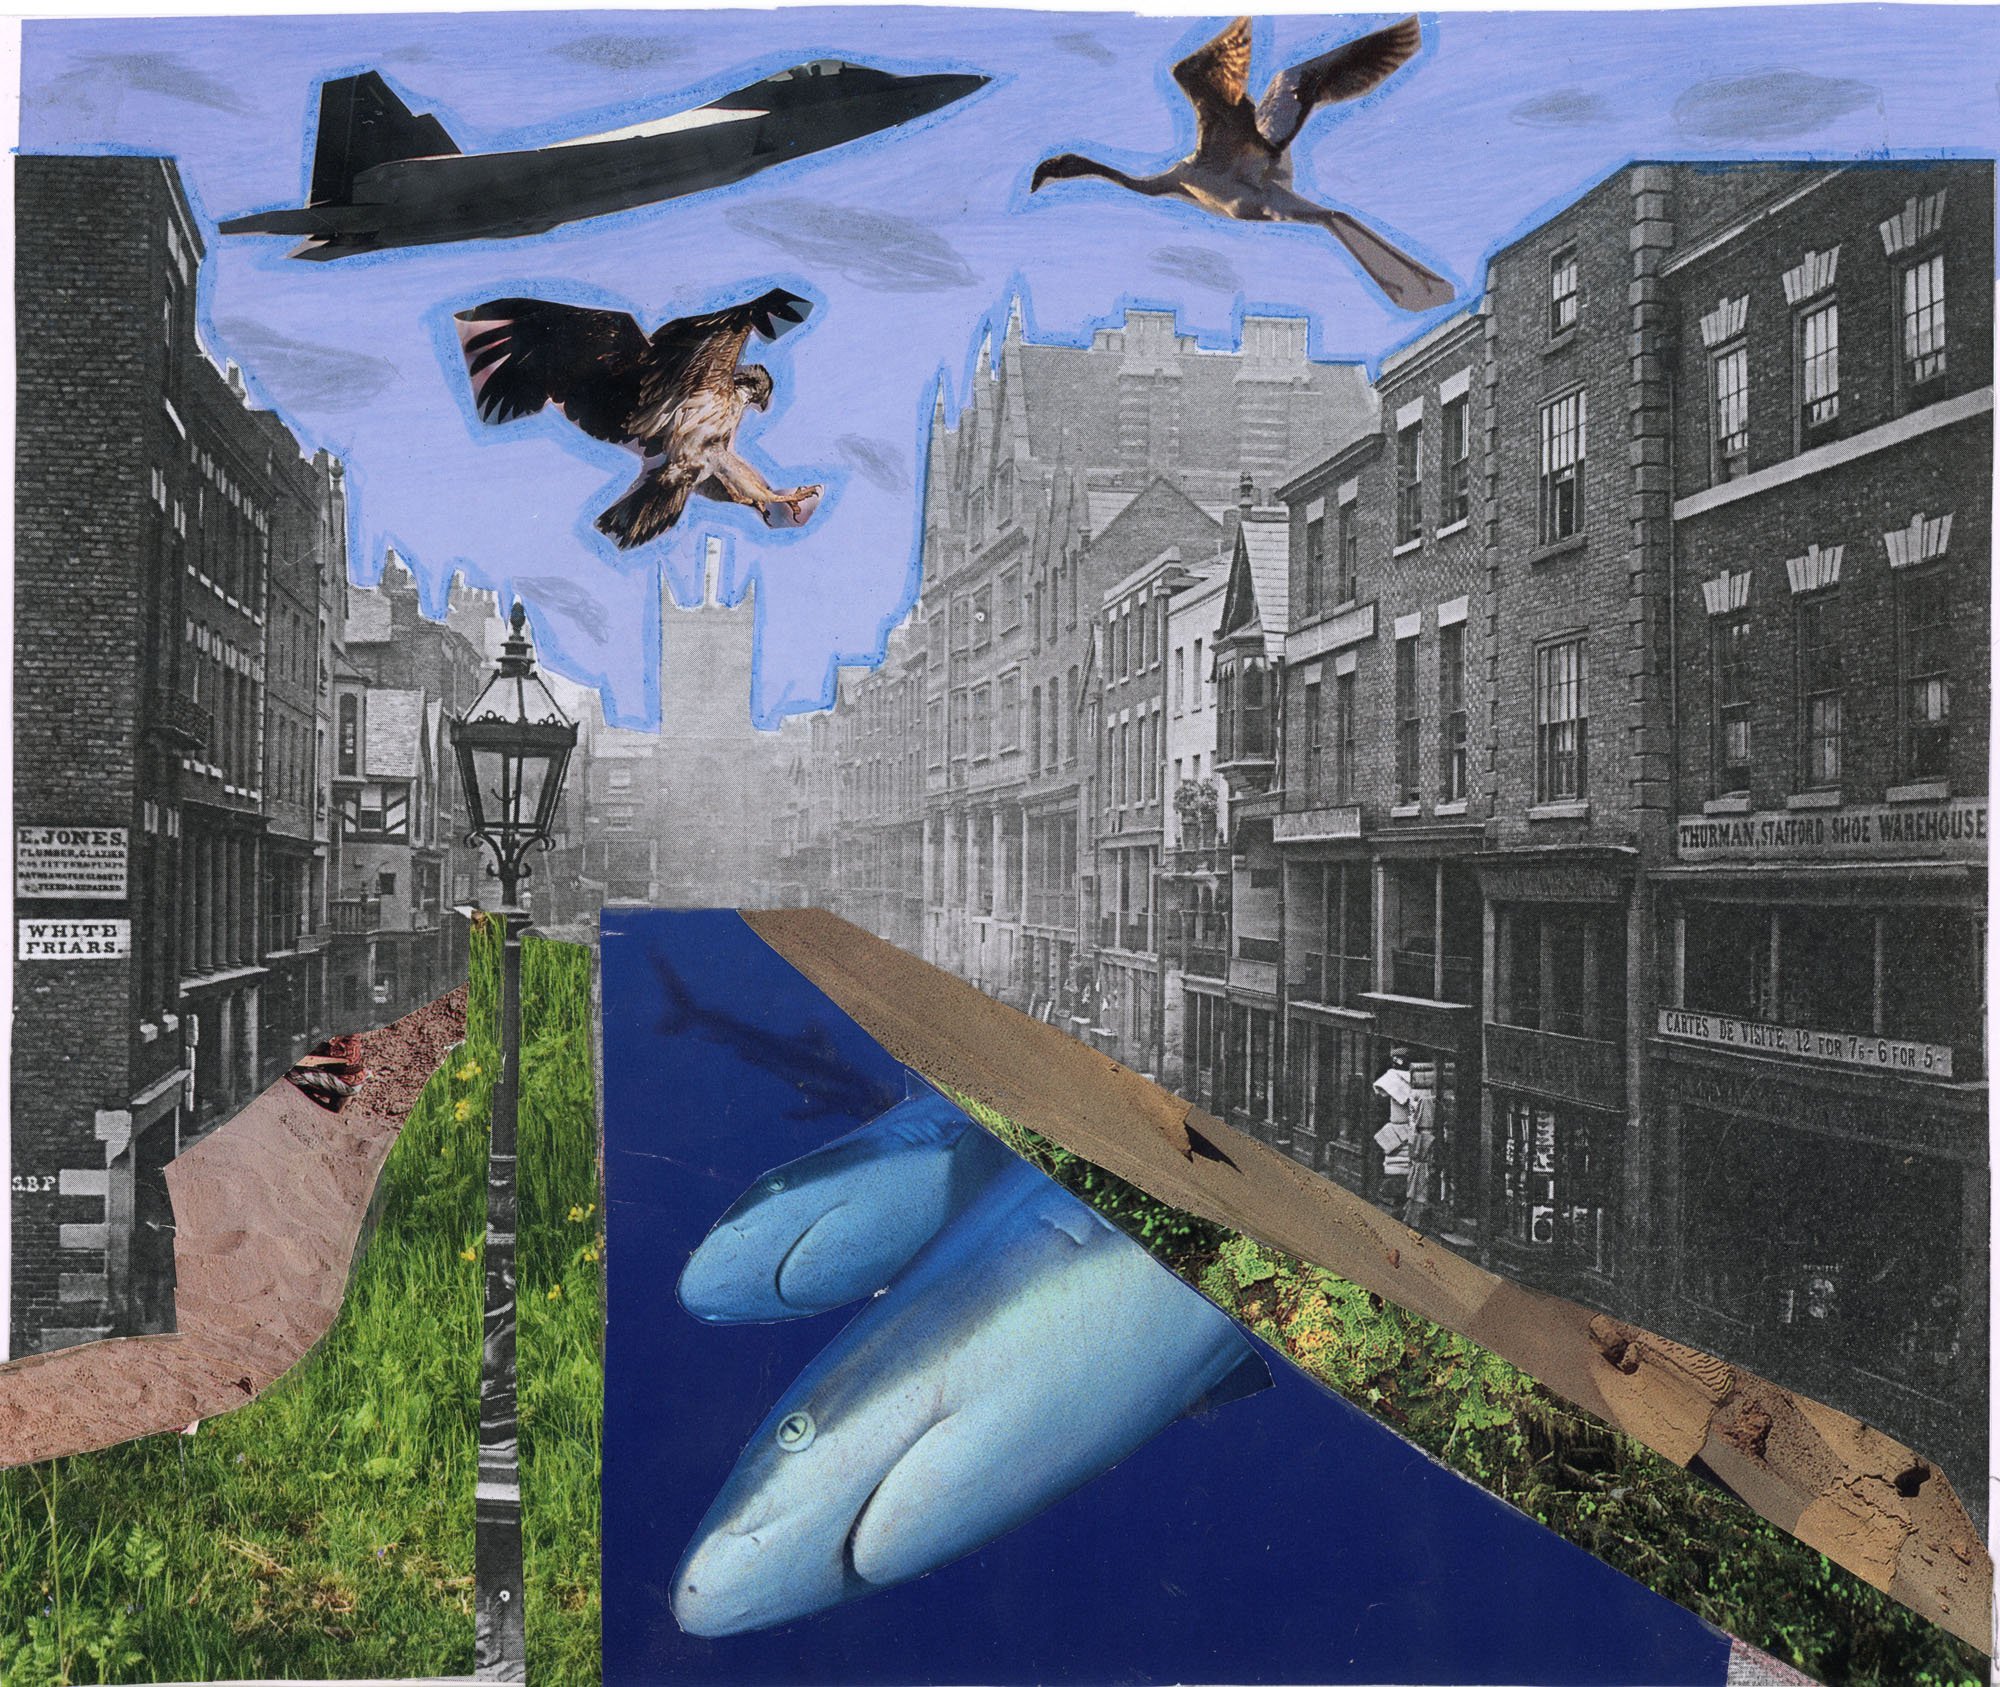 Old black and white photo of buildings collaged with images of a fighter jet and birds in the sky above and great white sharks swimming in the road surface.